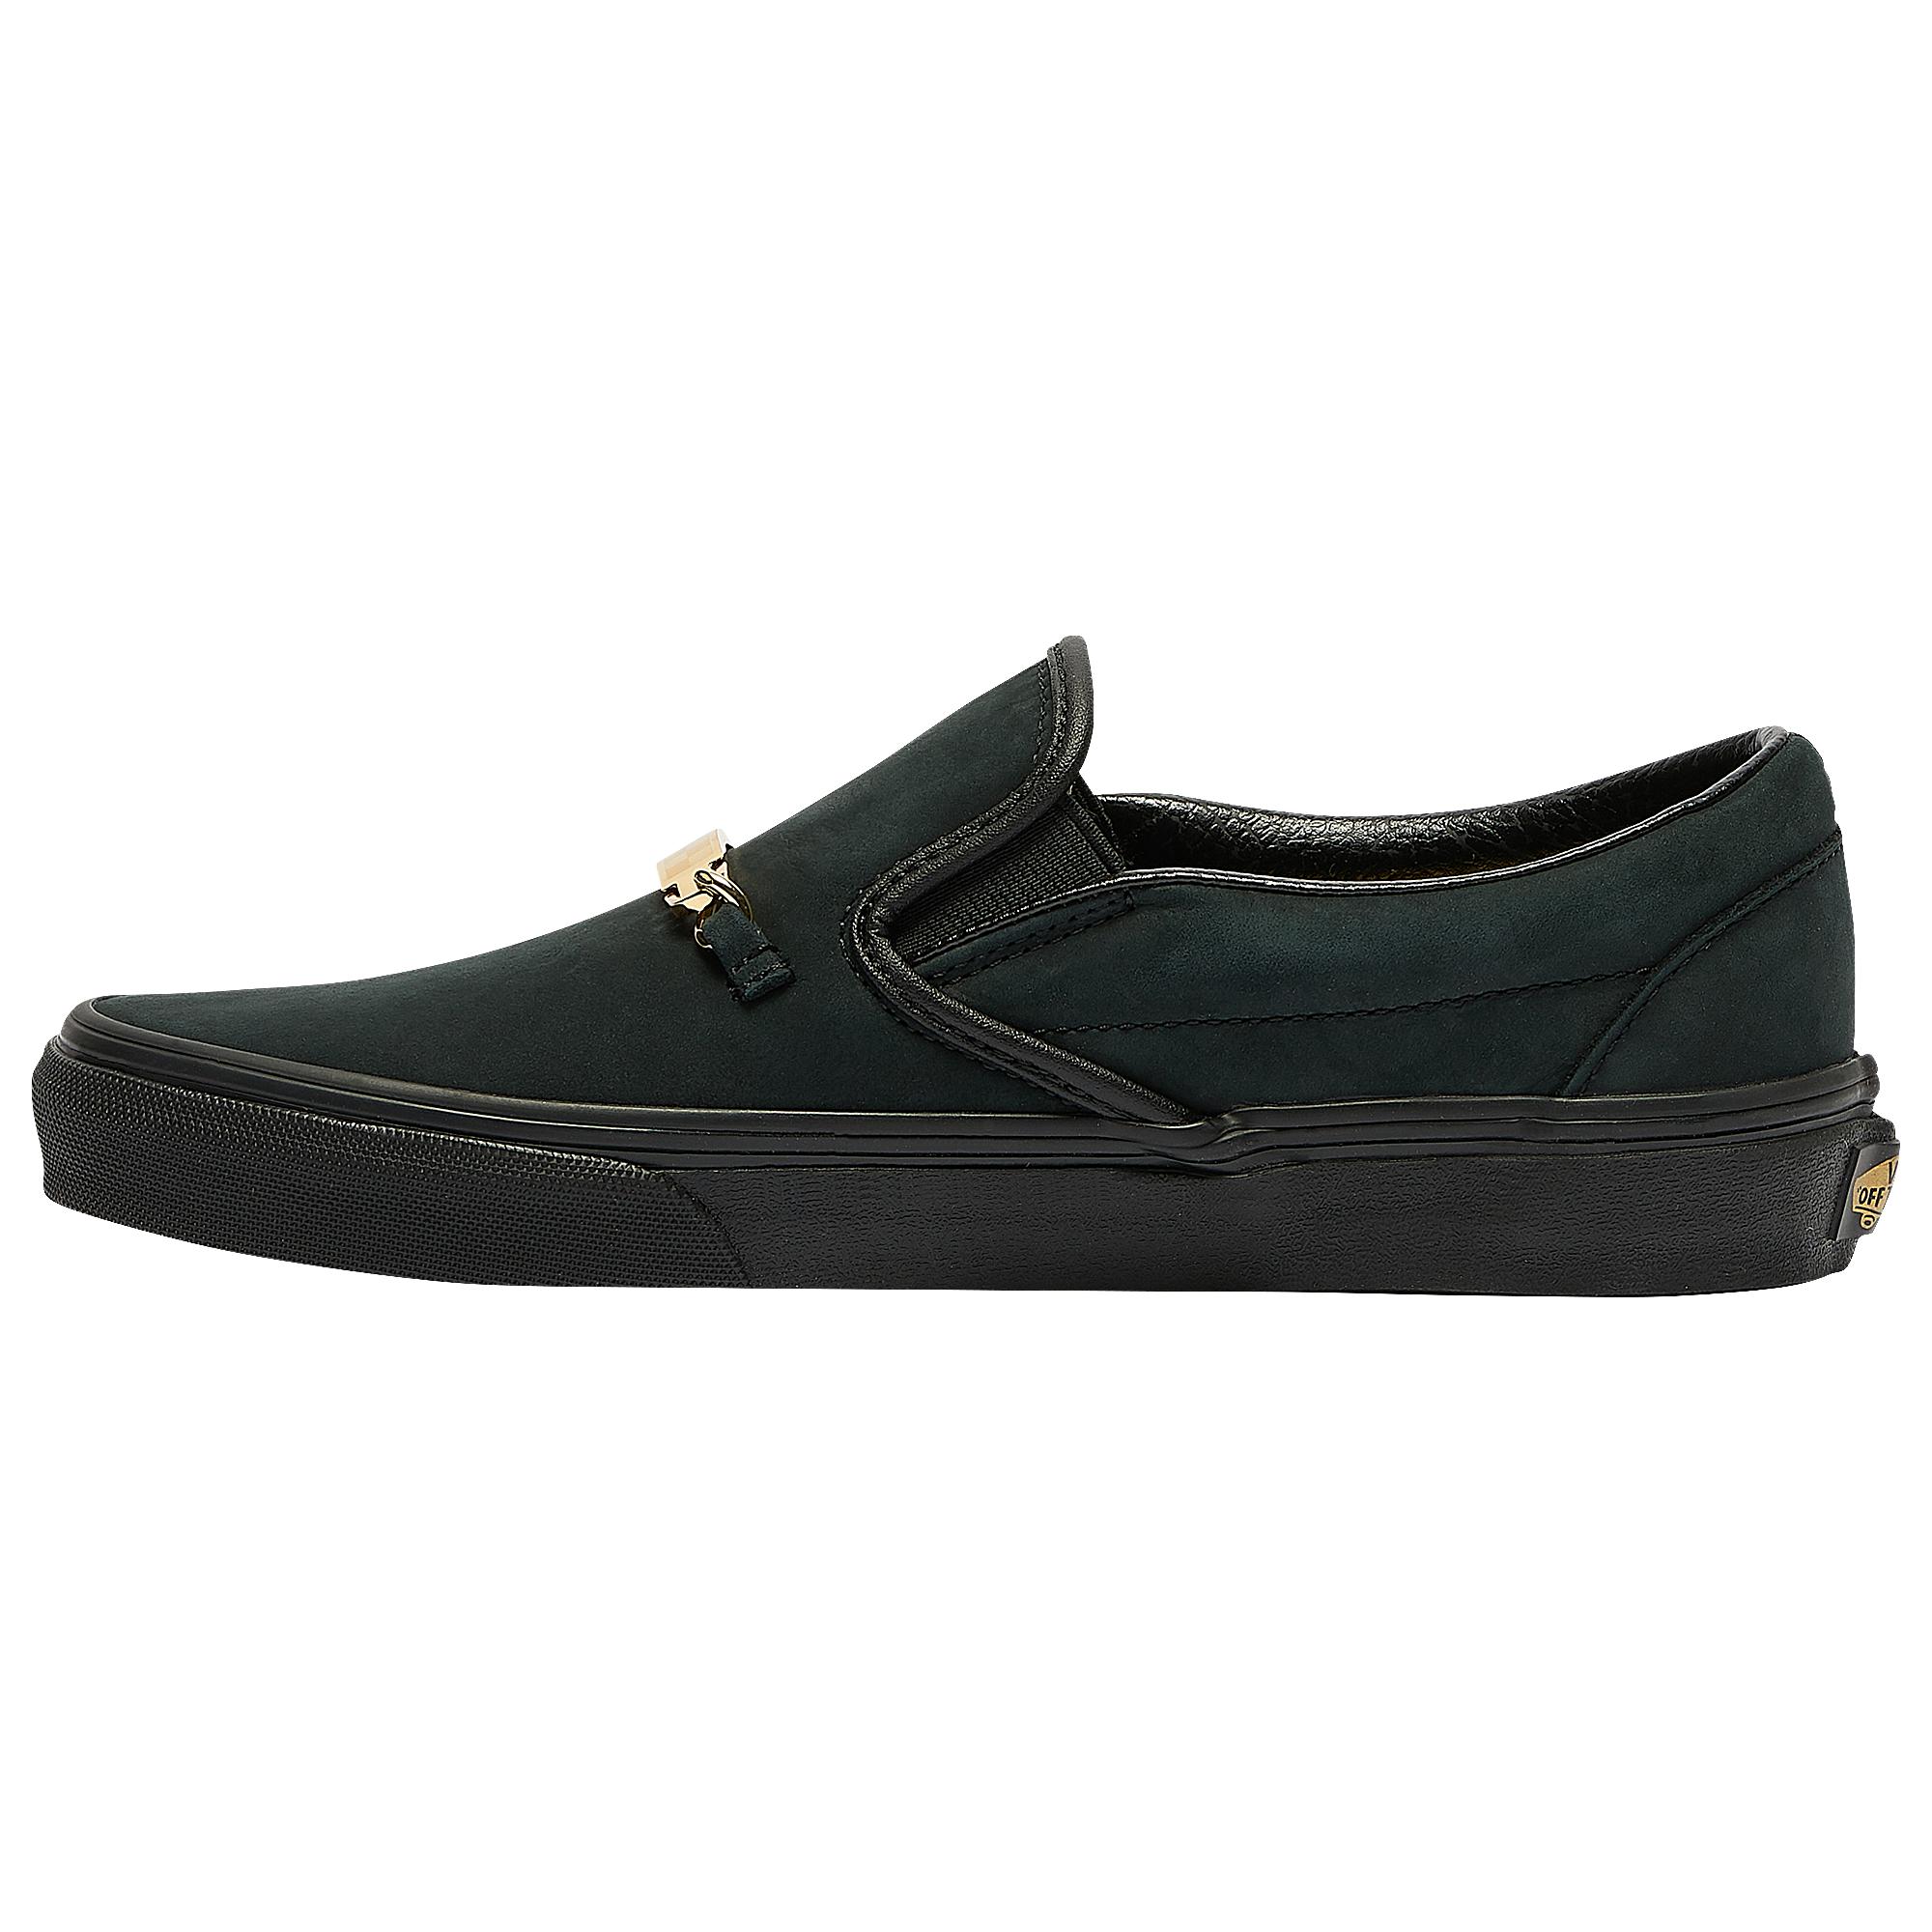 Vans Canvas Classic Slip On Loafers in Black - Lyst